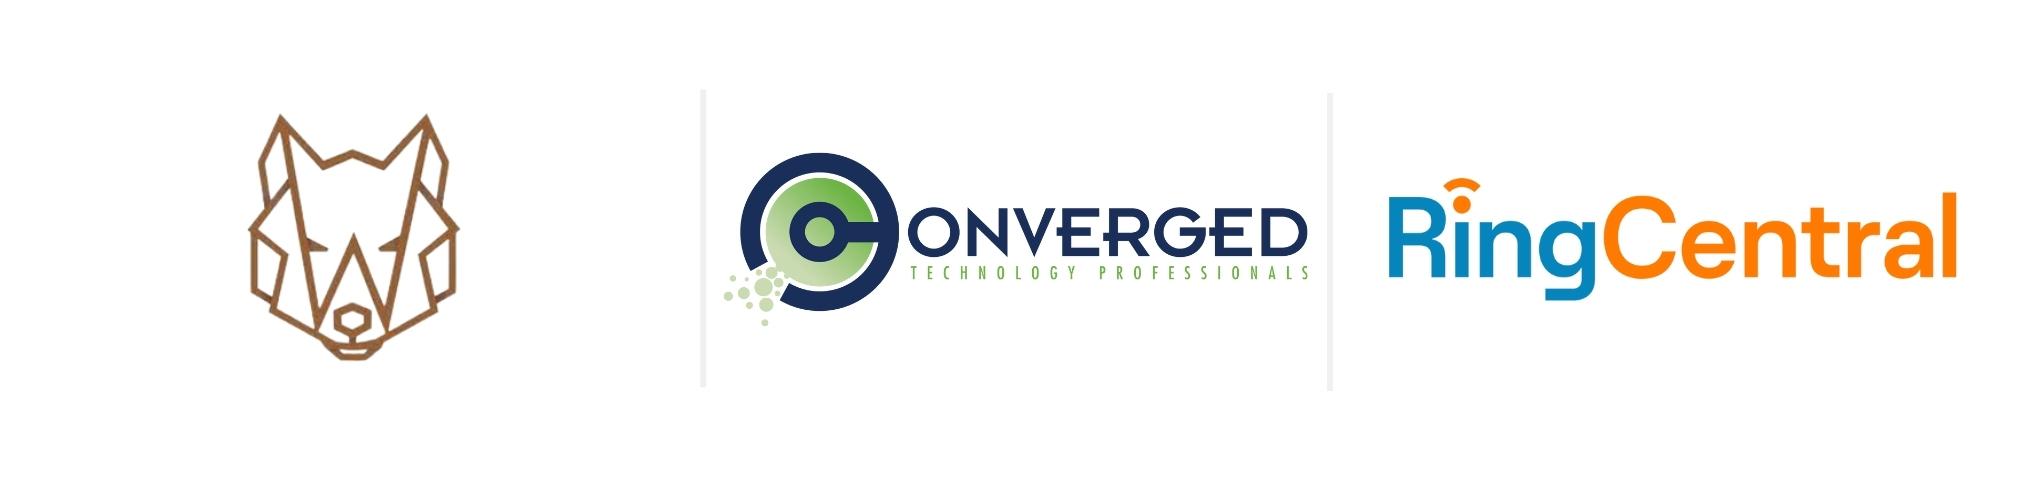 Wolf River|Converged|RingCentral